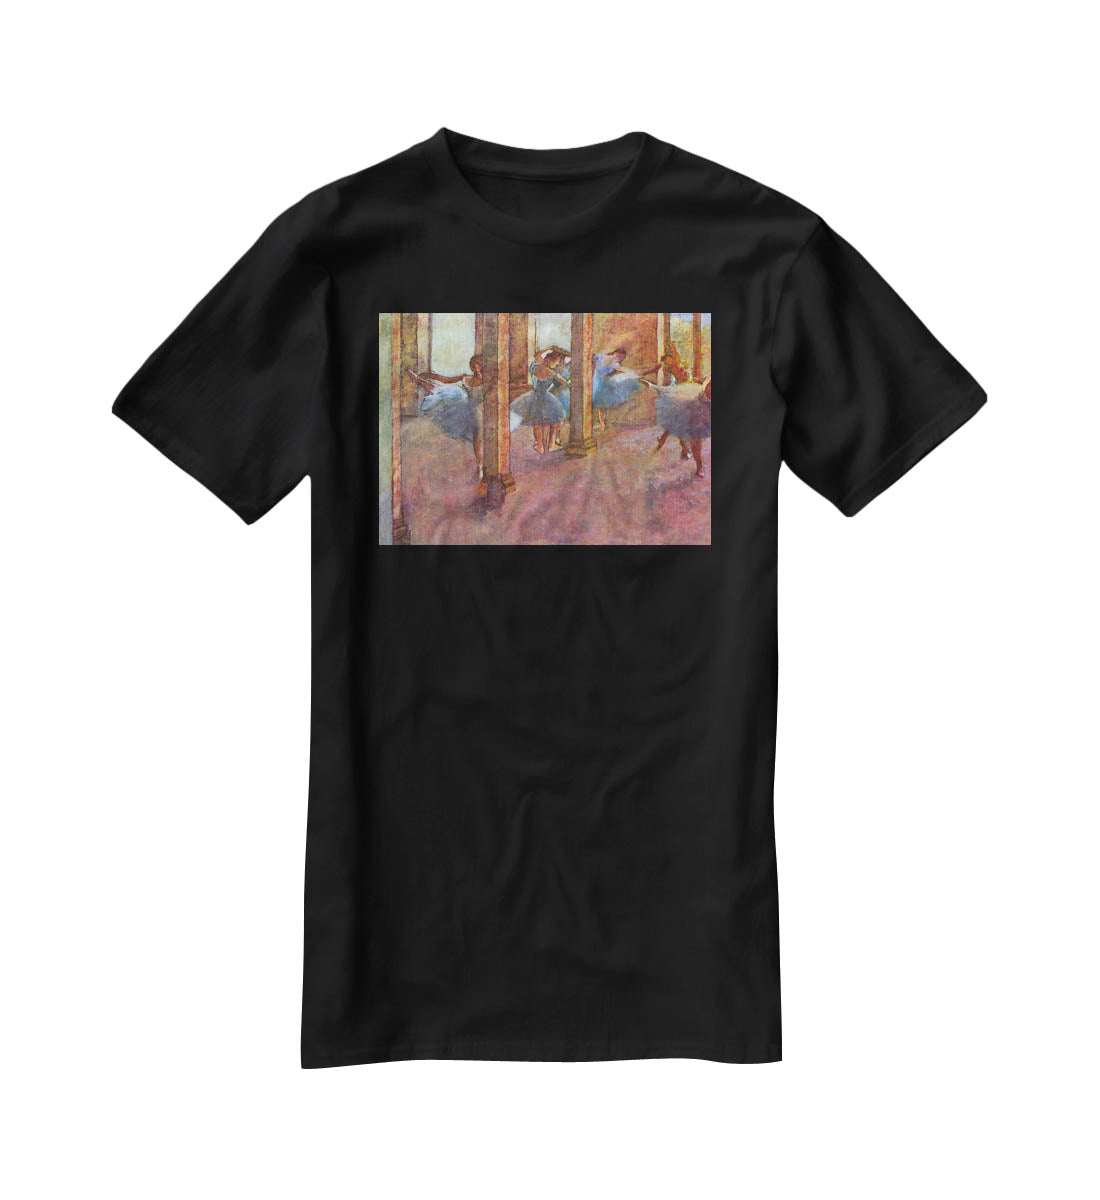 Dancers in the Foyer by Degas T-Shirt - Canvas Art Rocks - 1